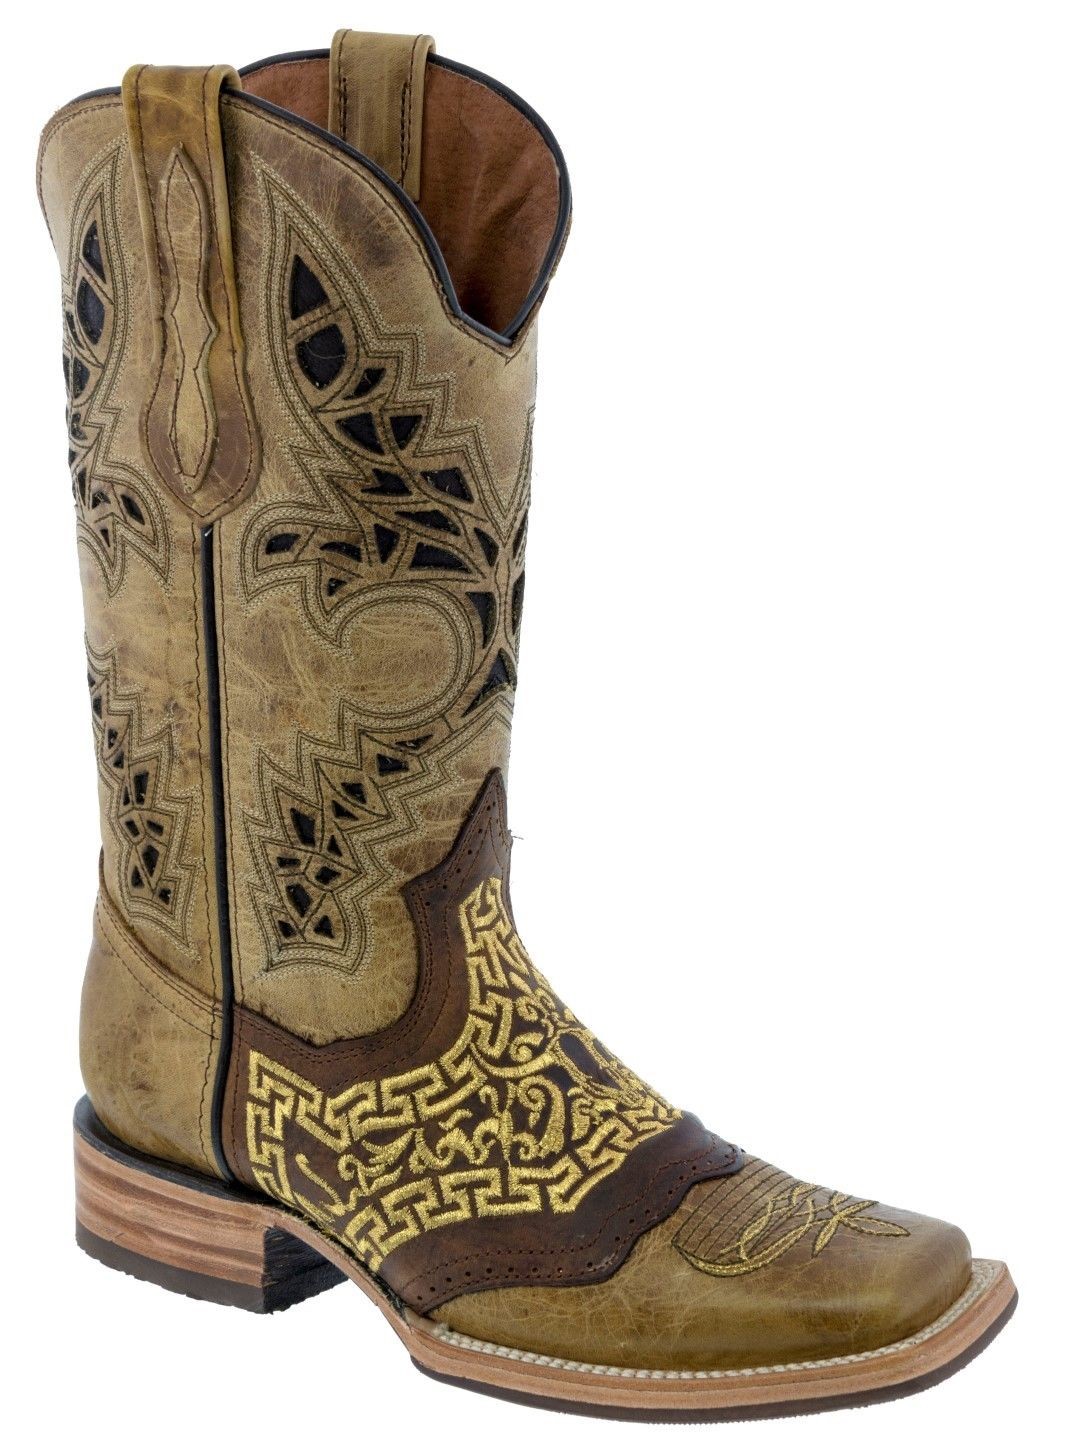 Mens Beige Leather Cowboy Boots Bull Head Embroidery Western Wear ...